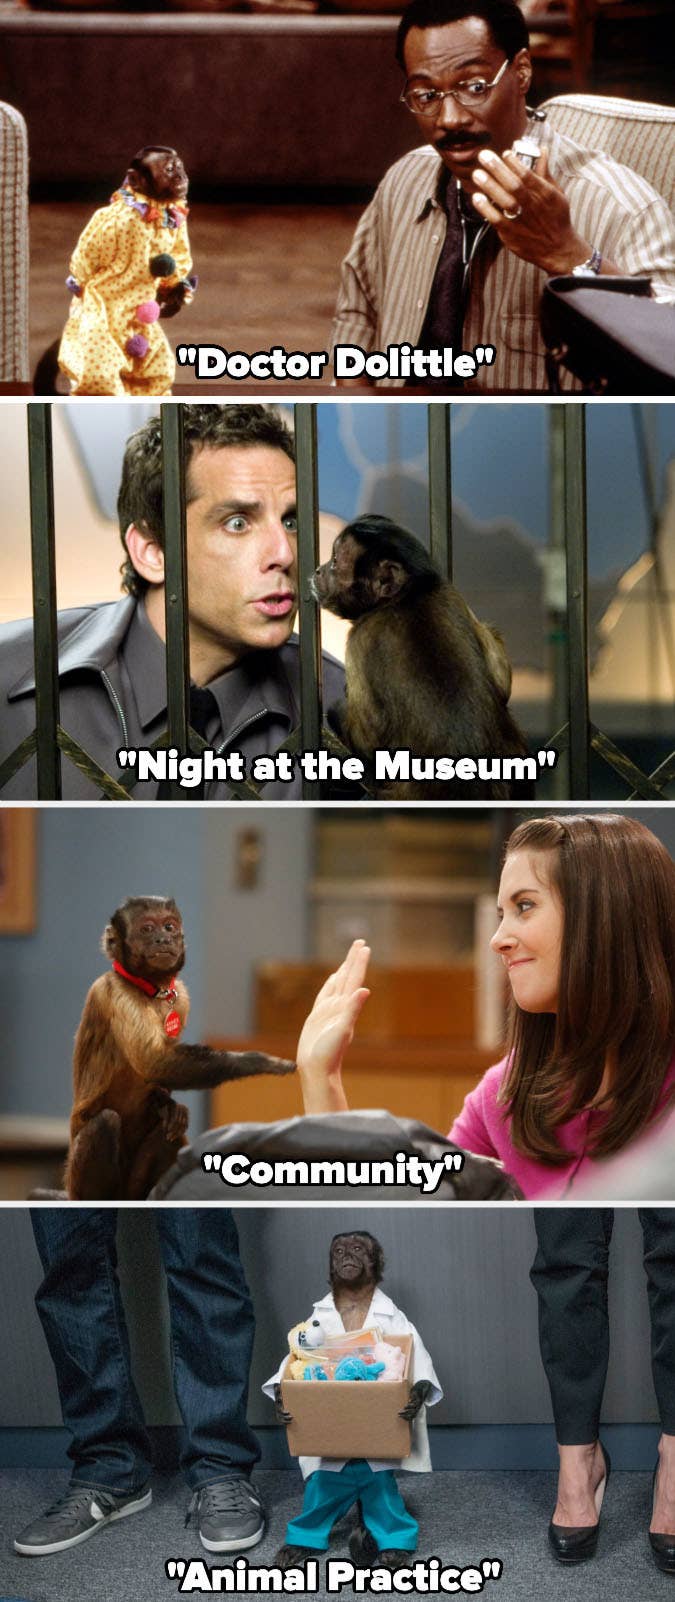 Crystal the Monkey in &quot;Doctor Dolittle,&quot; &quot;Night at the Museum,&quot; &quot;Community,&quot; and &quot;Animal Practice&quot;